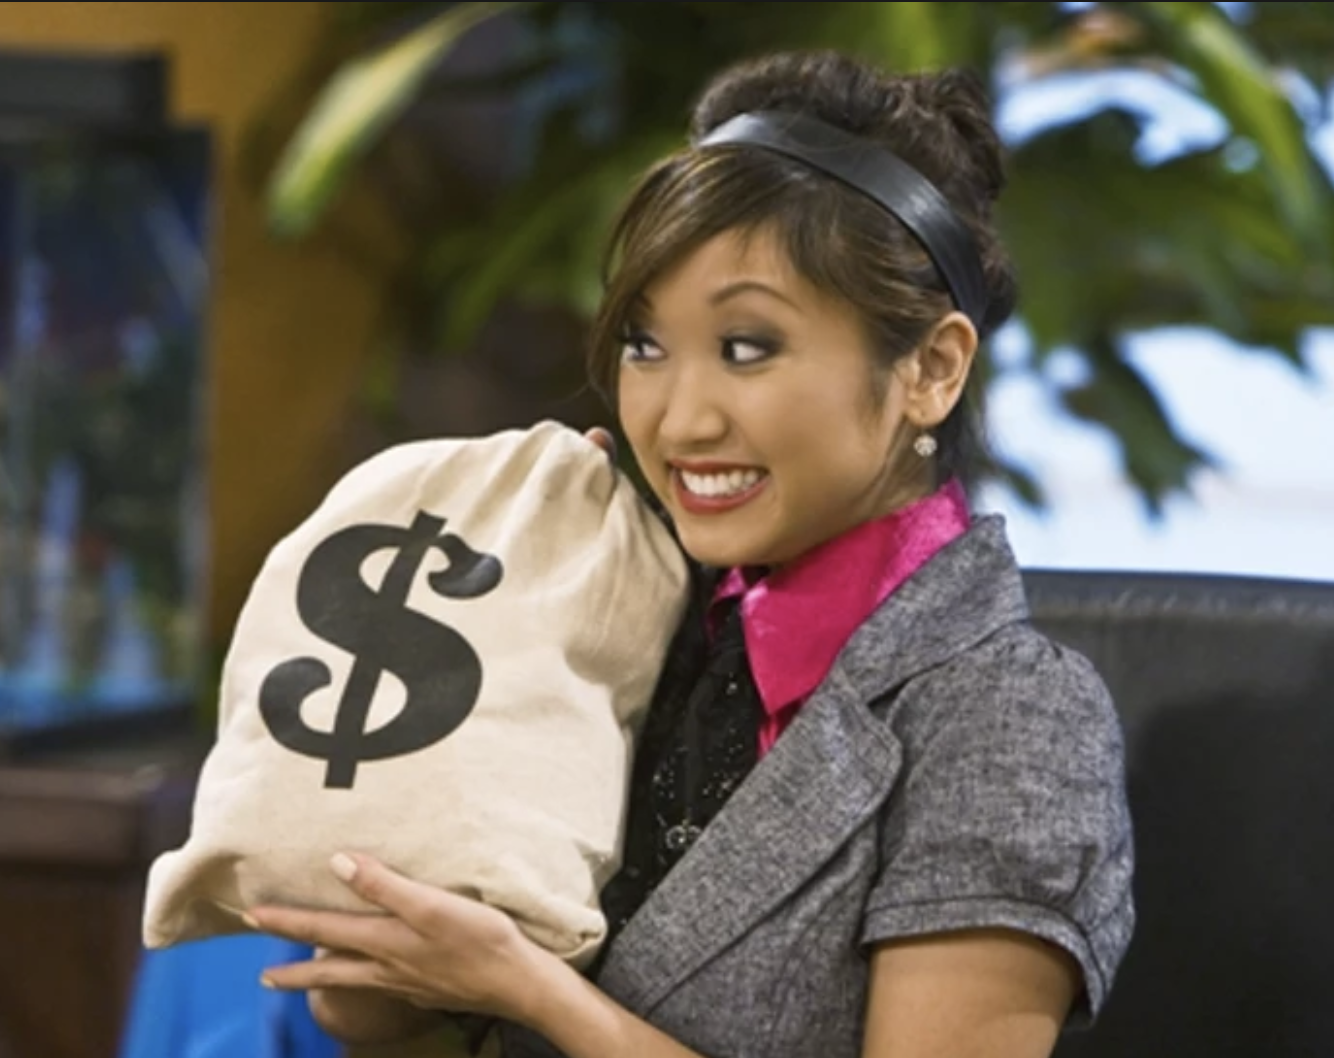 London Tipton in the Suite Life of Zack and Cody. What does London Tipton Look Like now?